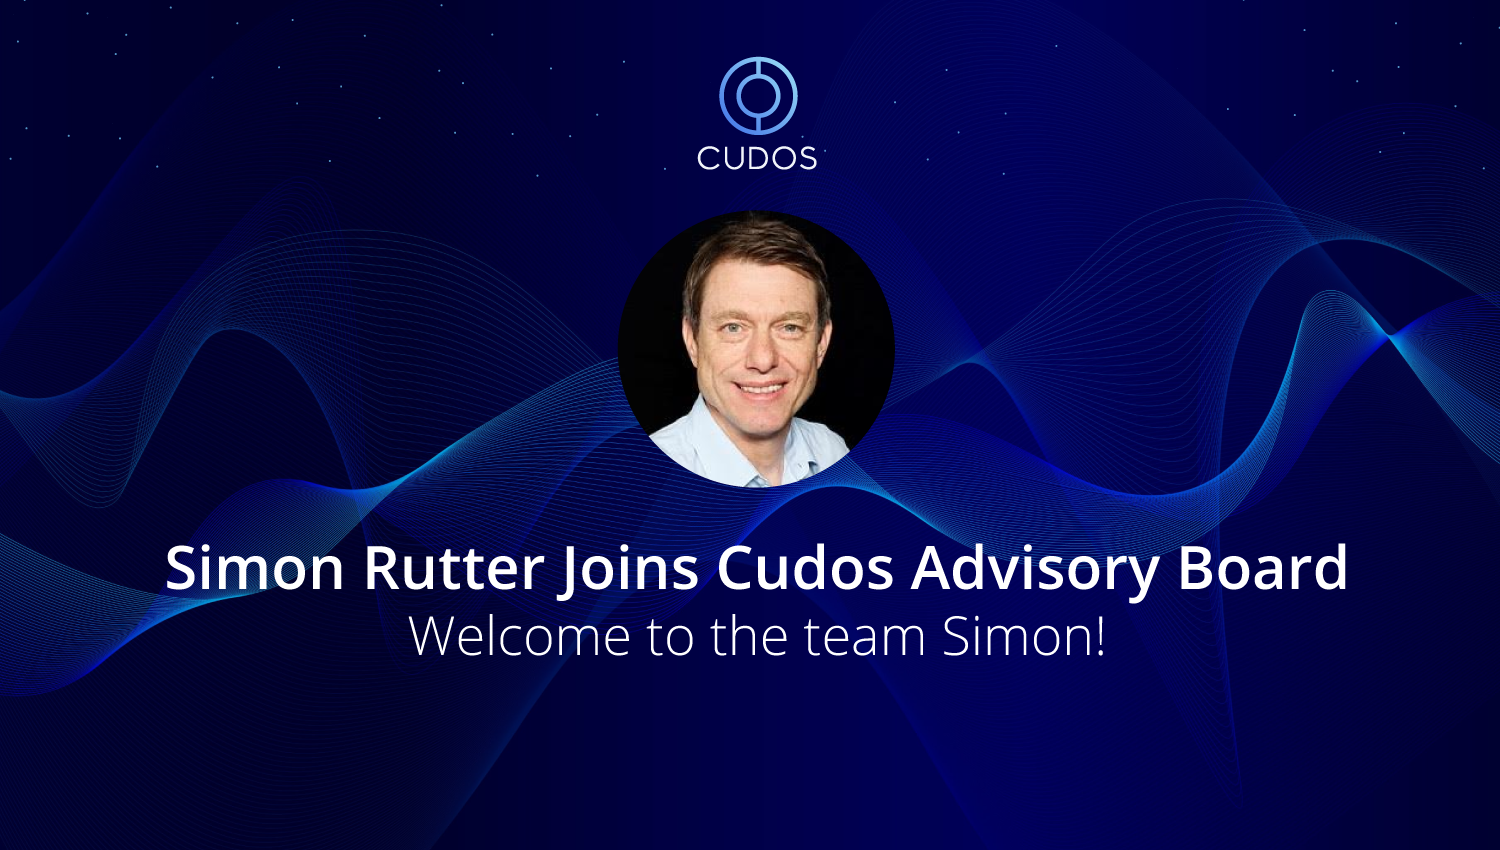 Former Sony PlayStation Executive VP Simon Rutter joins Cudos